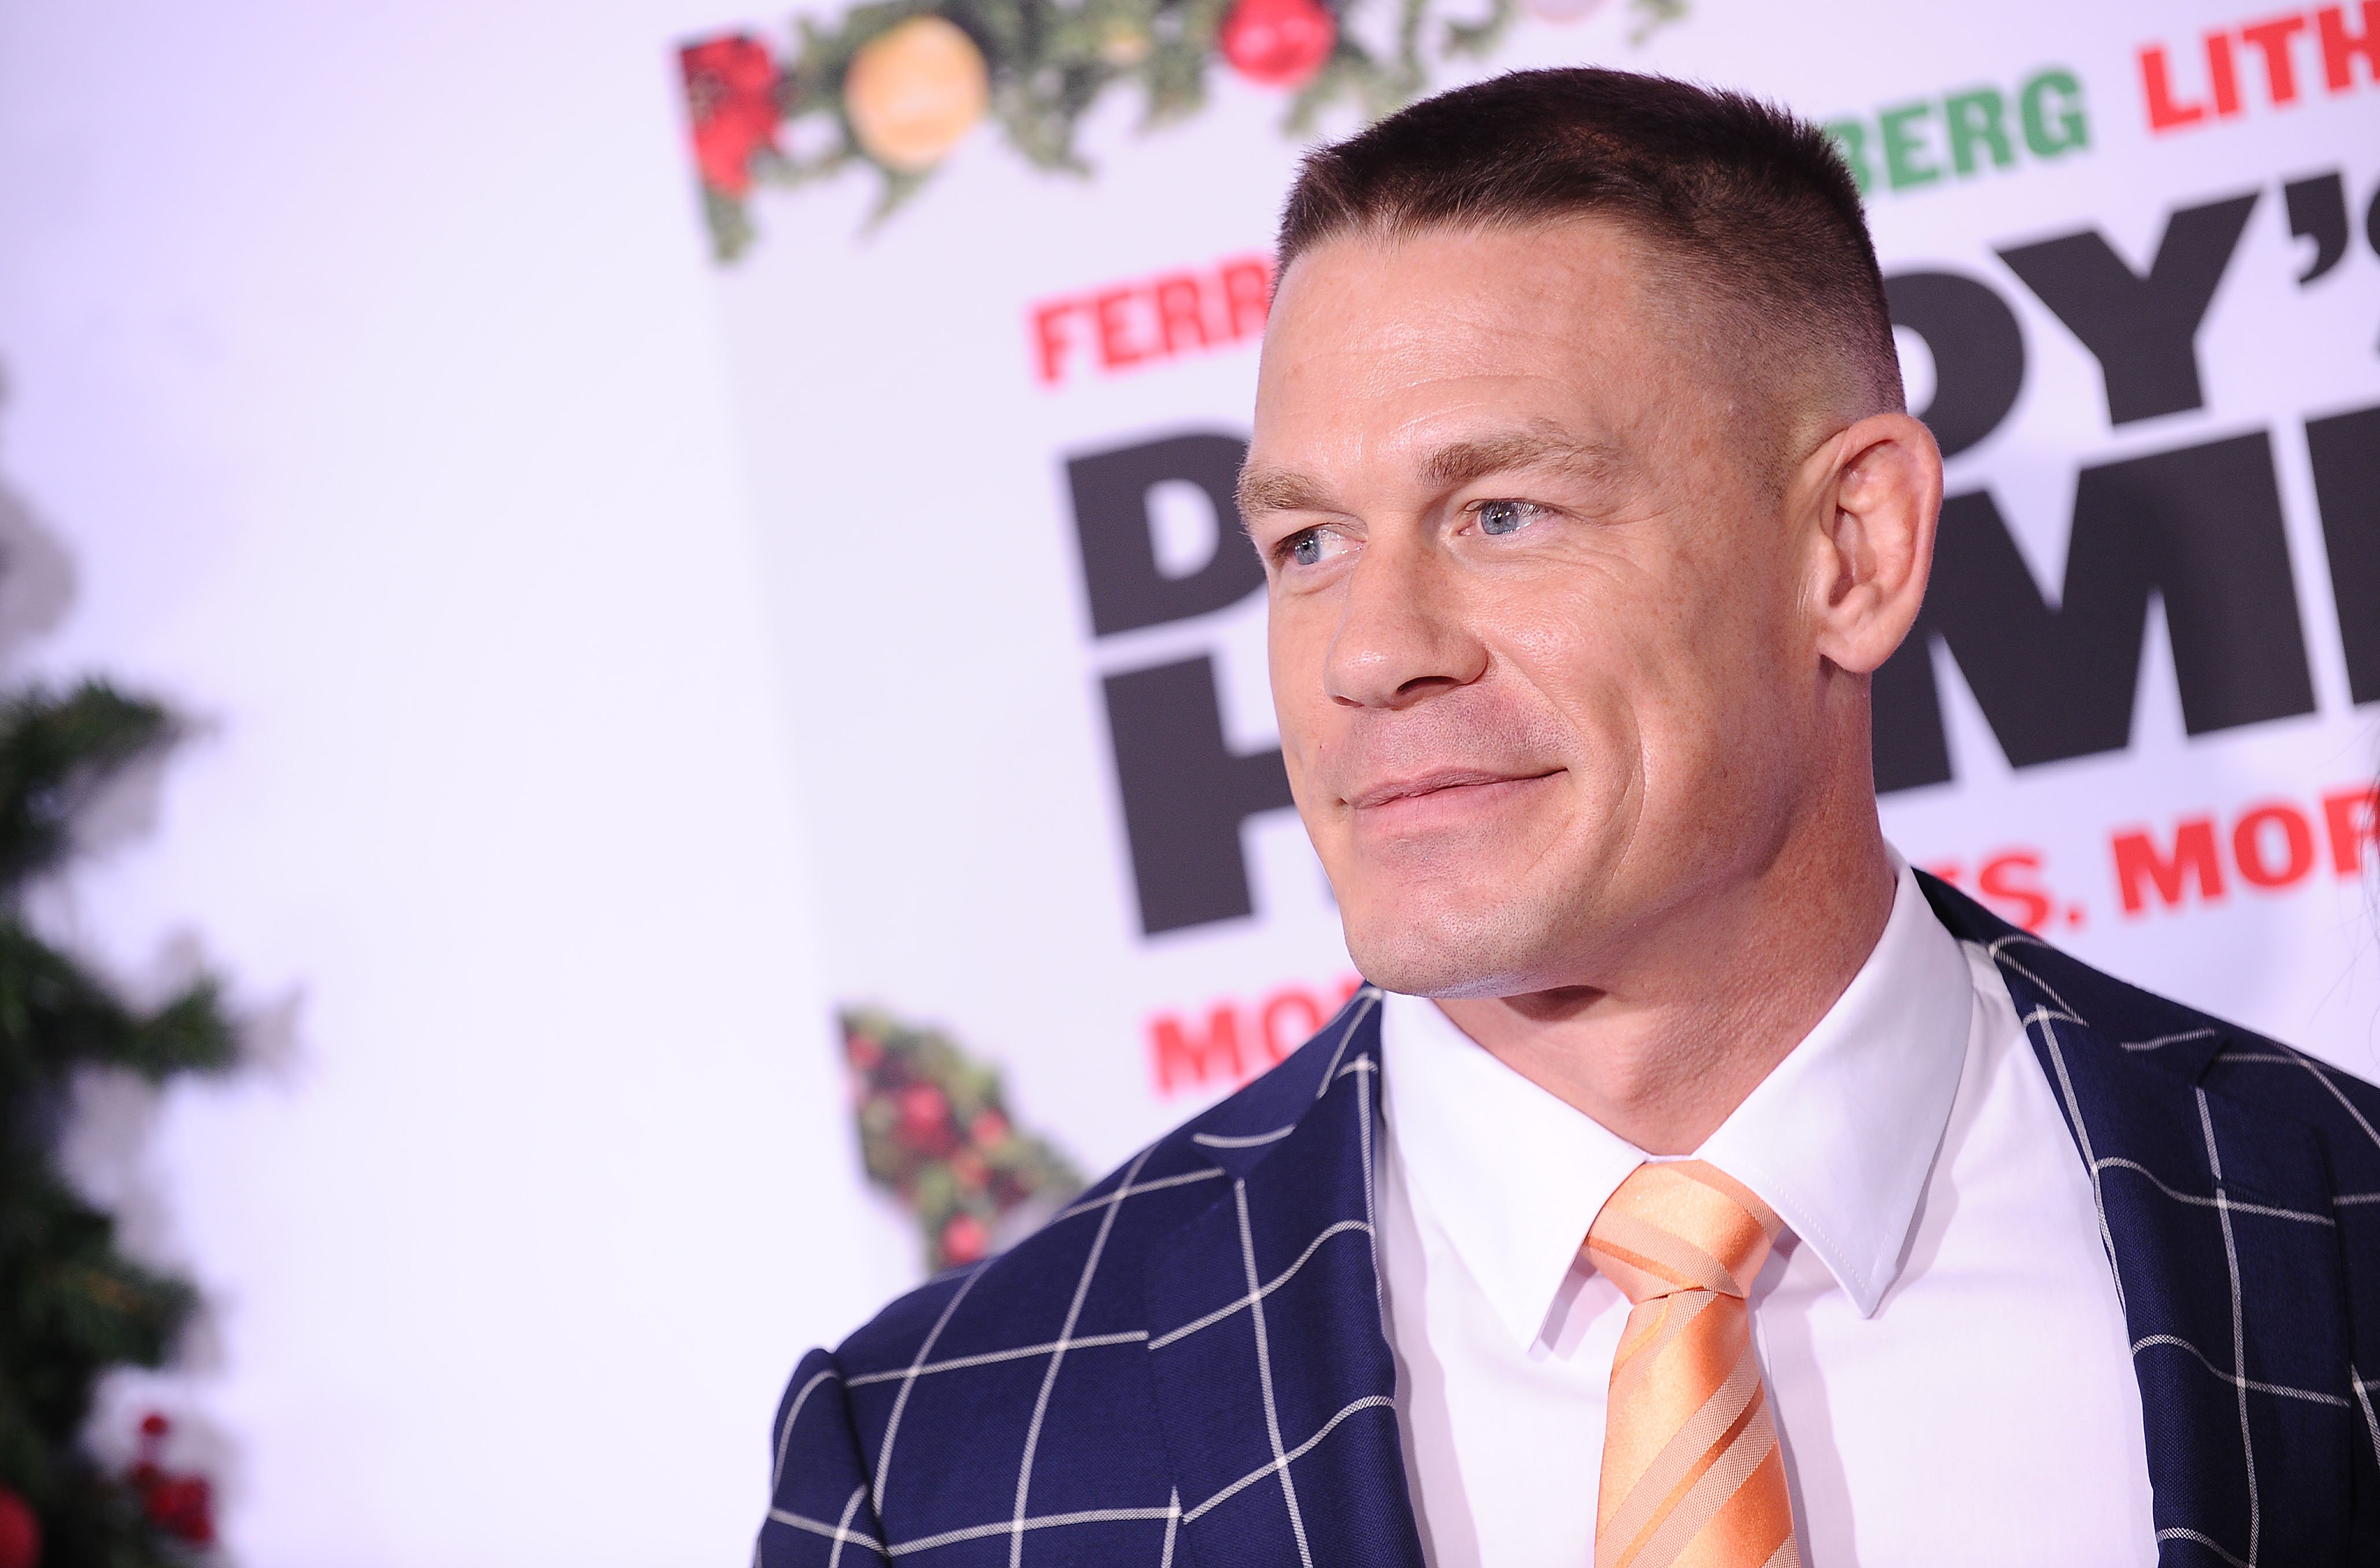 Breaking: John Cena Officially Enters The 2018 Royal Rumble Match